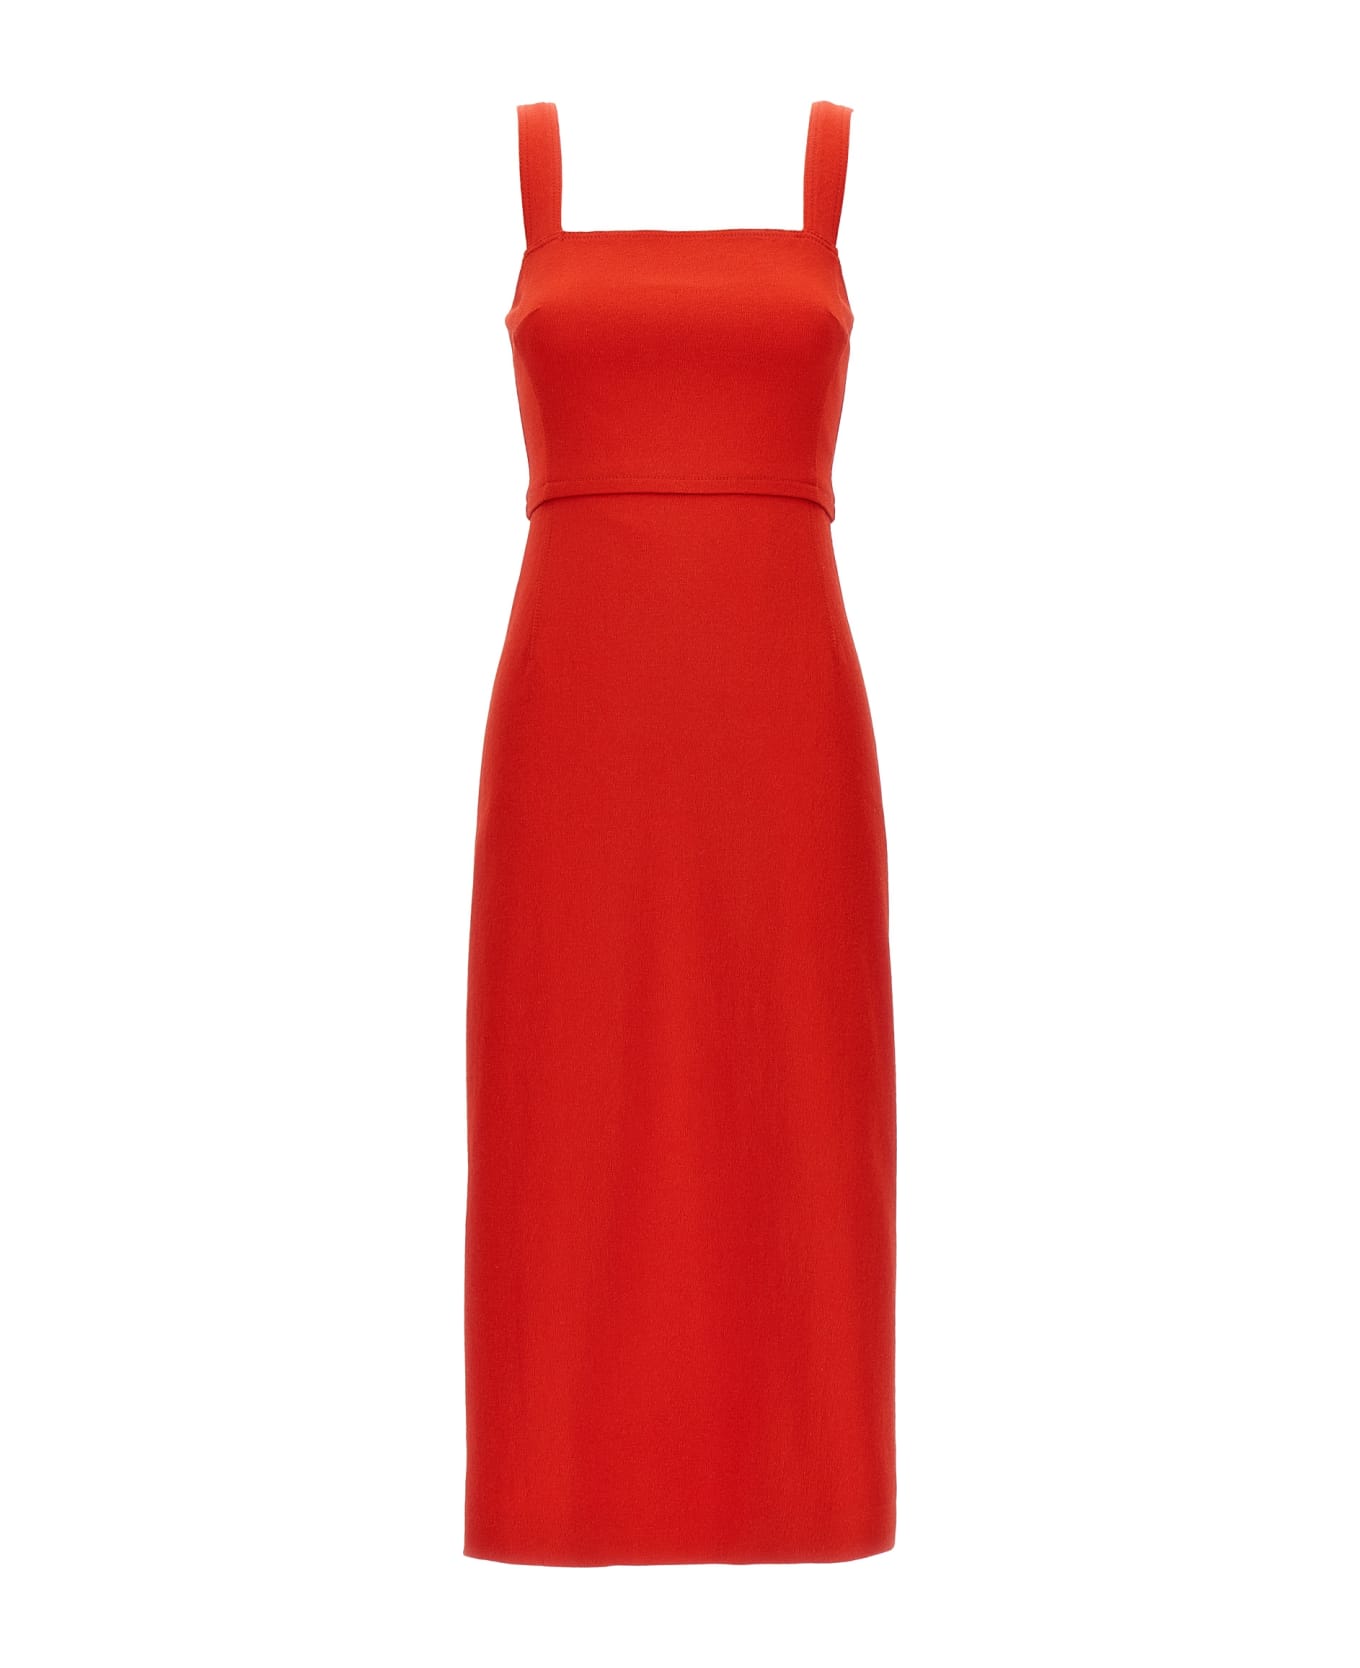 Tory Burch Faille Stretch Dress - Red ワンピース＆ドレス